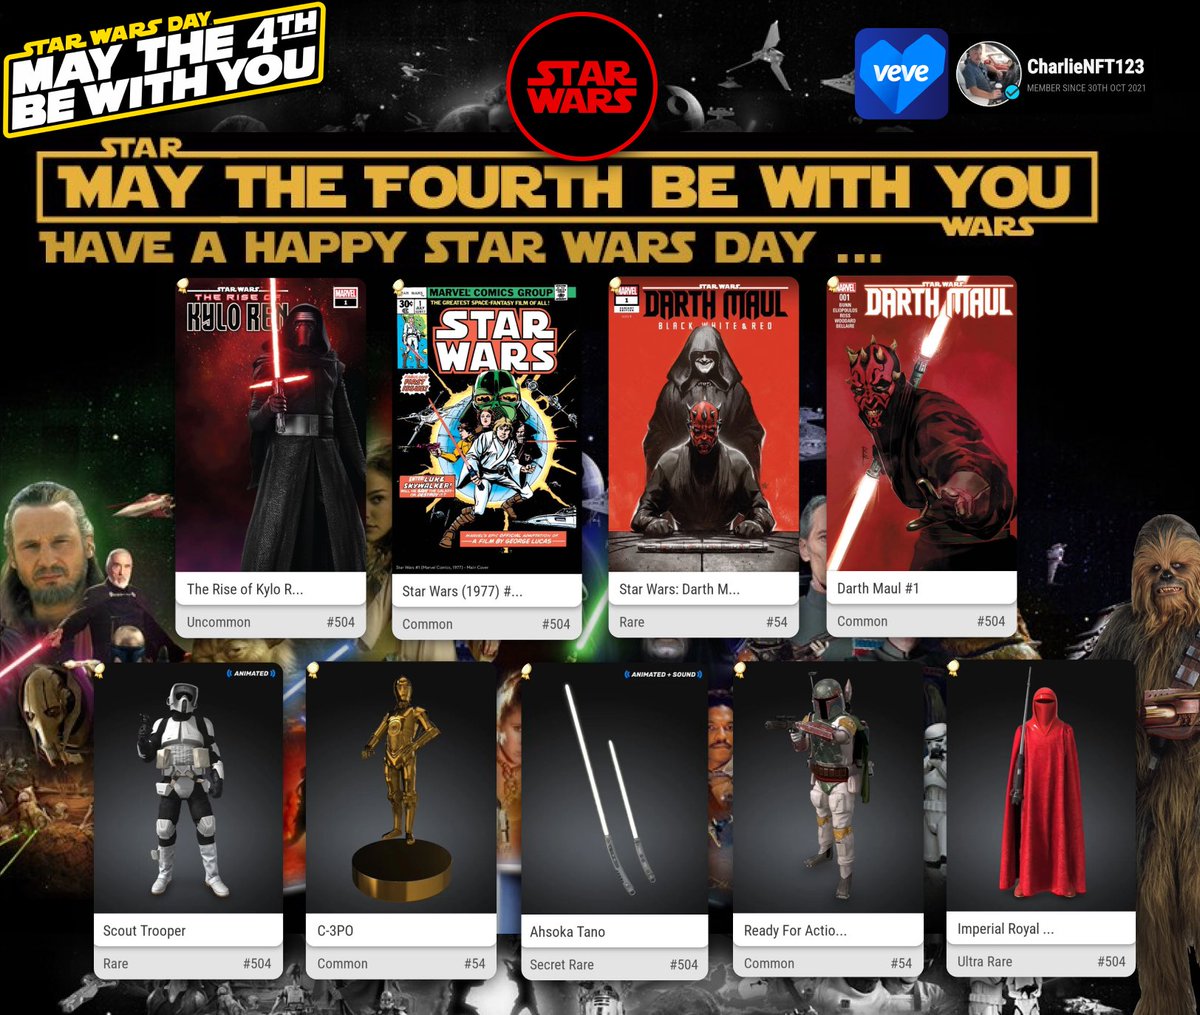 May The Fourth Be With You «Happy Star Wars Day! 🌟 Celebrate May 4th with VeVe!» #StarWarsDay #MayThe4thBeWithYou #DigitalCollectibles @veve_official @starwars #CollectorsAtHeart 💙 #veve #vevefam